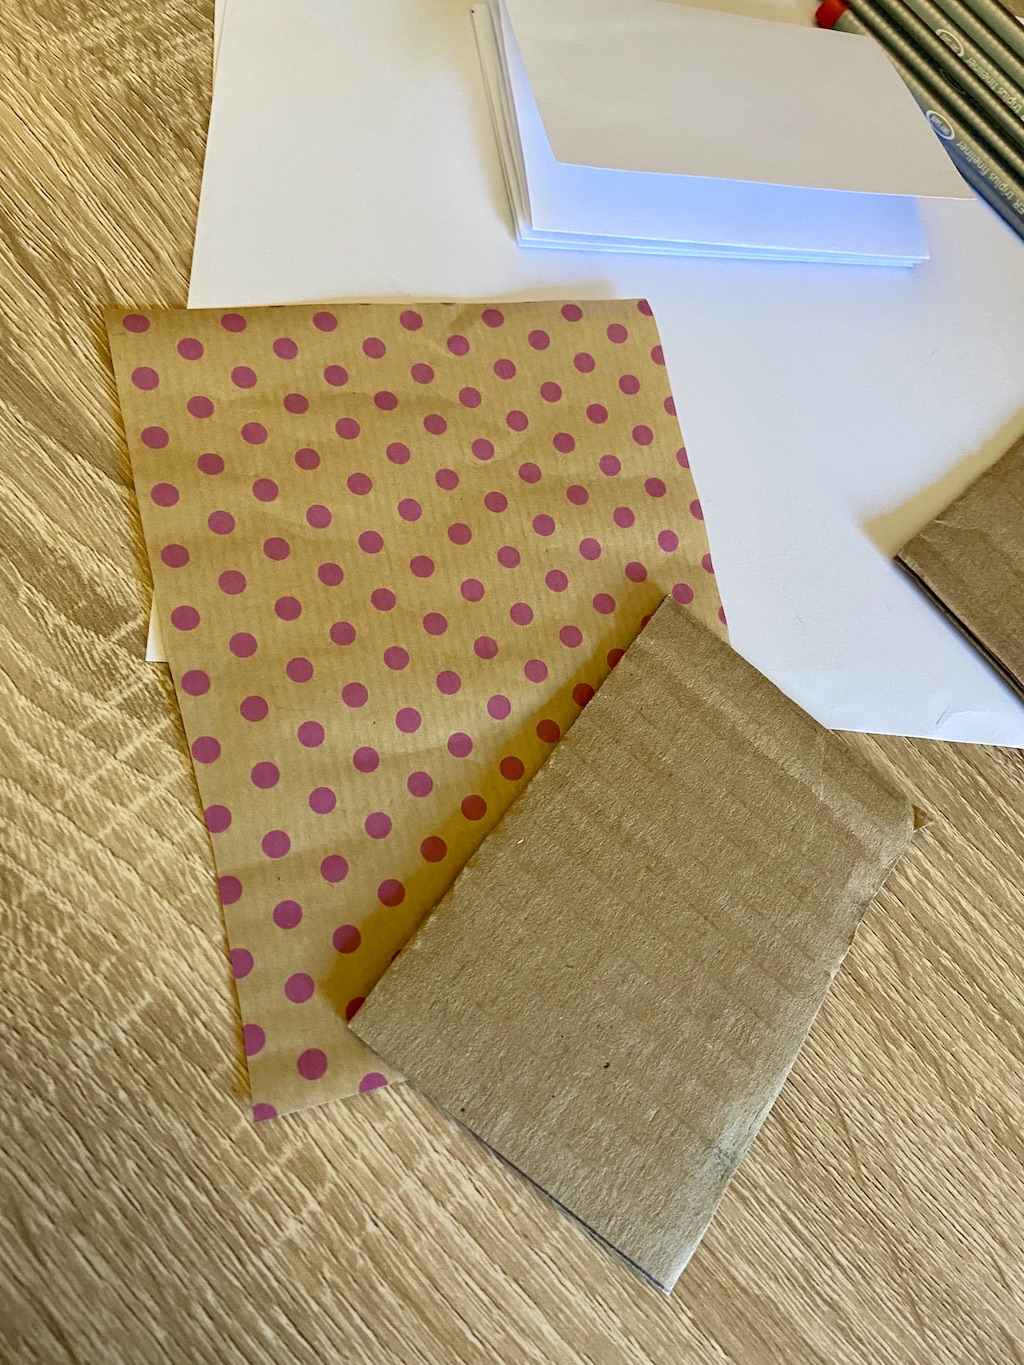 Take your decorative or scrap wrapping paper and cut two pieces a little larger than the cardboard, about an inch or two bigger on each side.